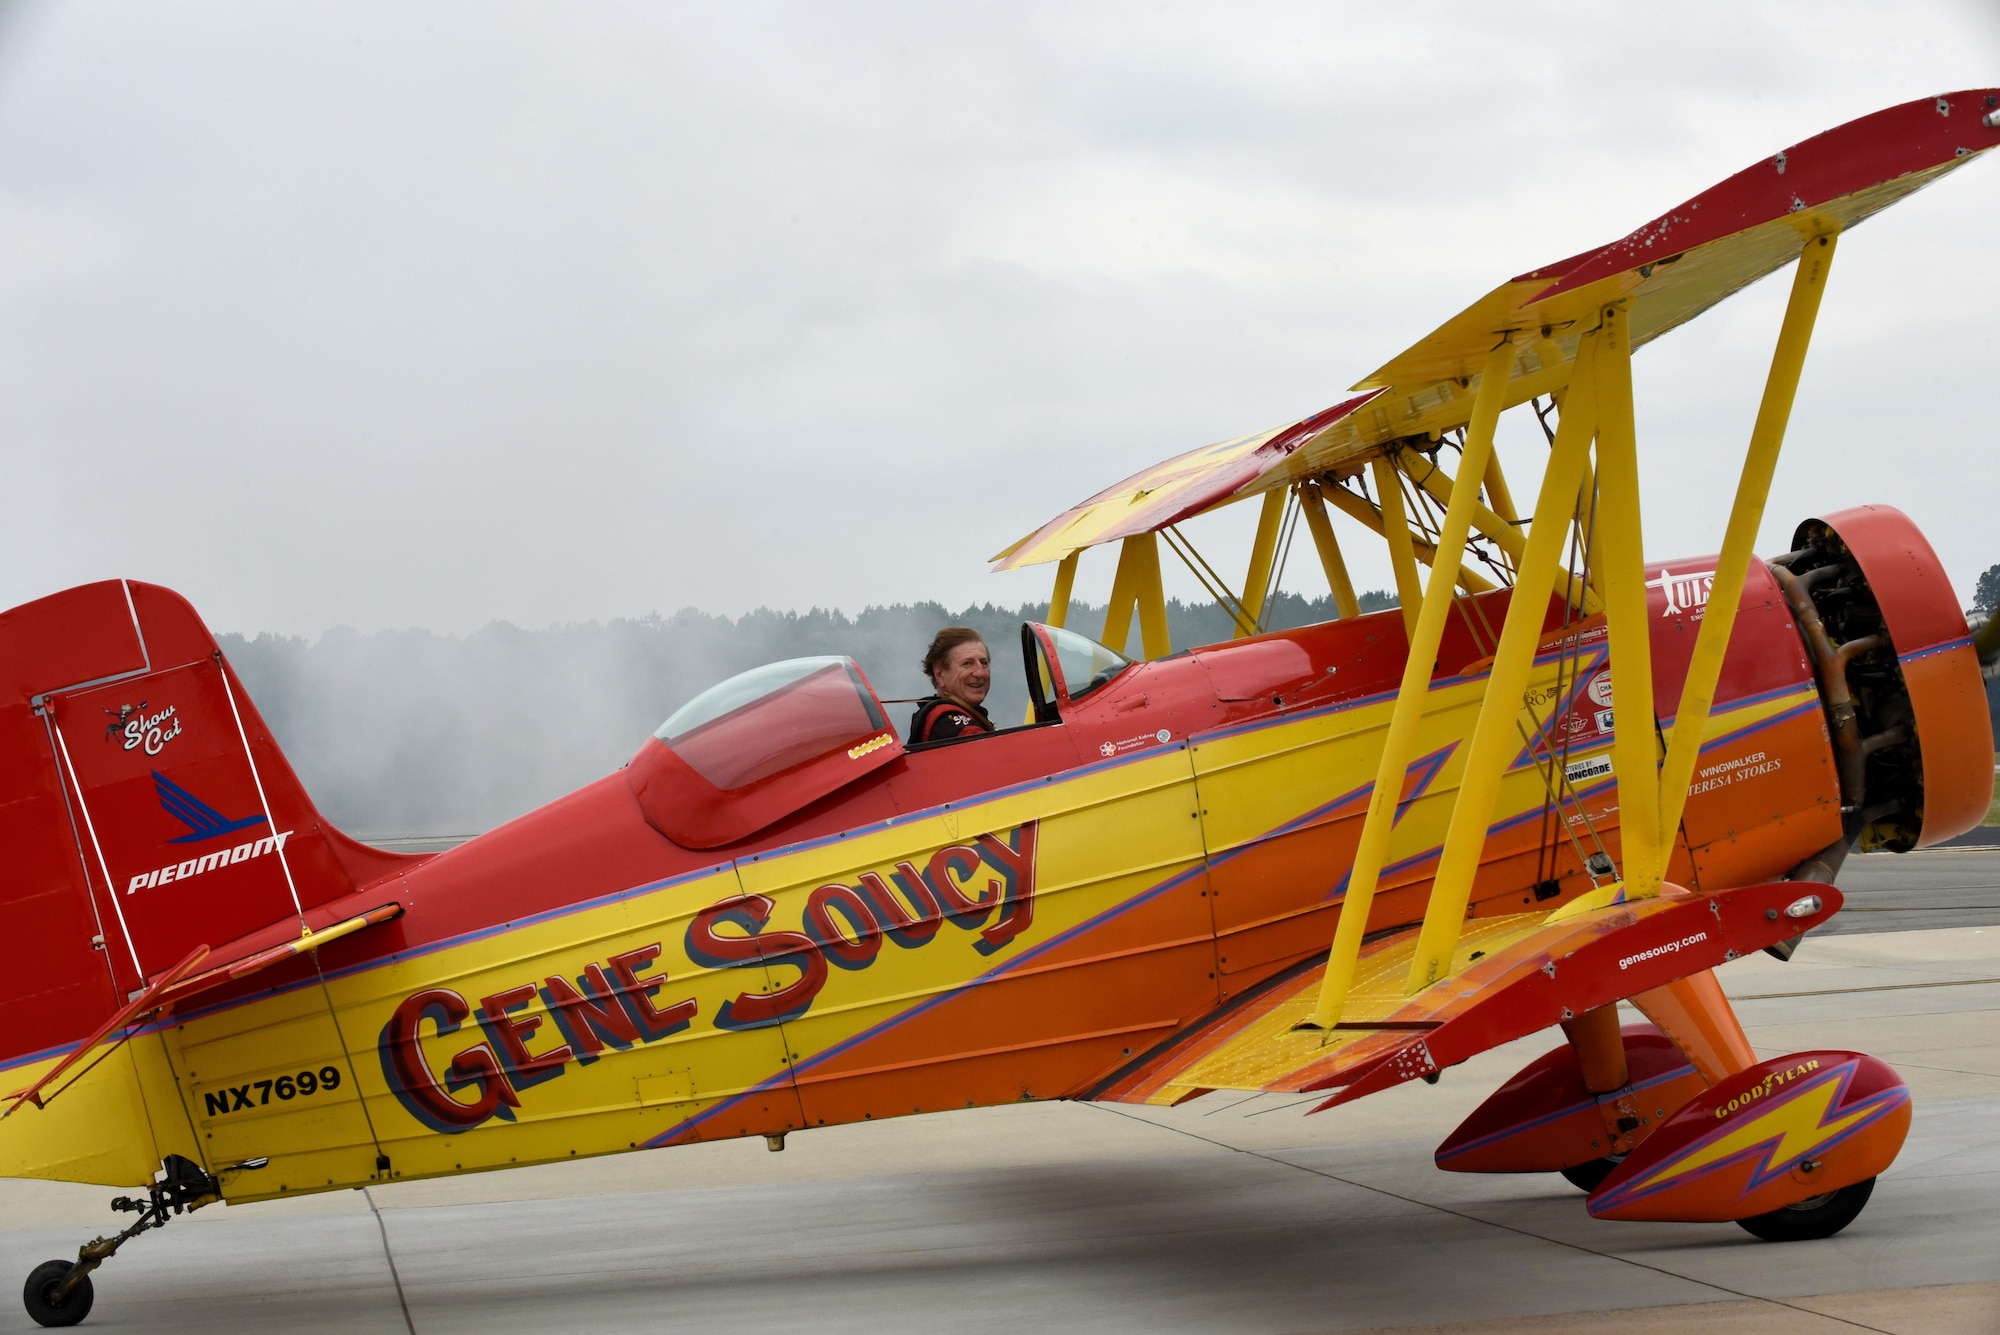 Gene Soucy pilots a Grumman biplane nicknamed “Showcat,” during the Wings Over Wayne Air Show, May 21, 2017, at Seymour Johnson Air Force Base, North Carolina. Soucy began professional airshow flying in 1968. (U.S. Air Force photo by Airman 1st Class Victoria Boyton)